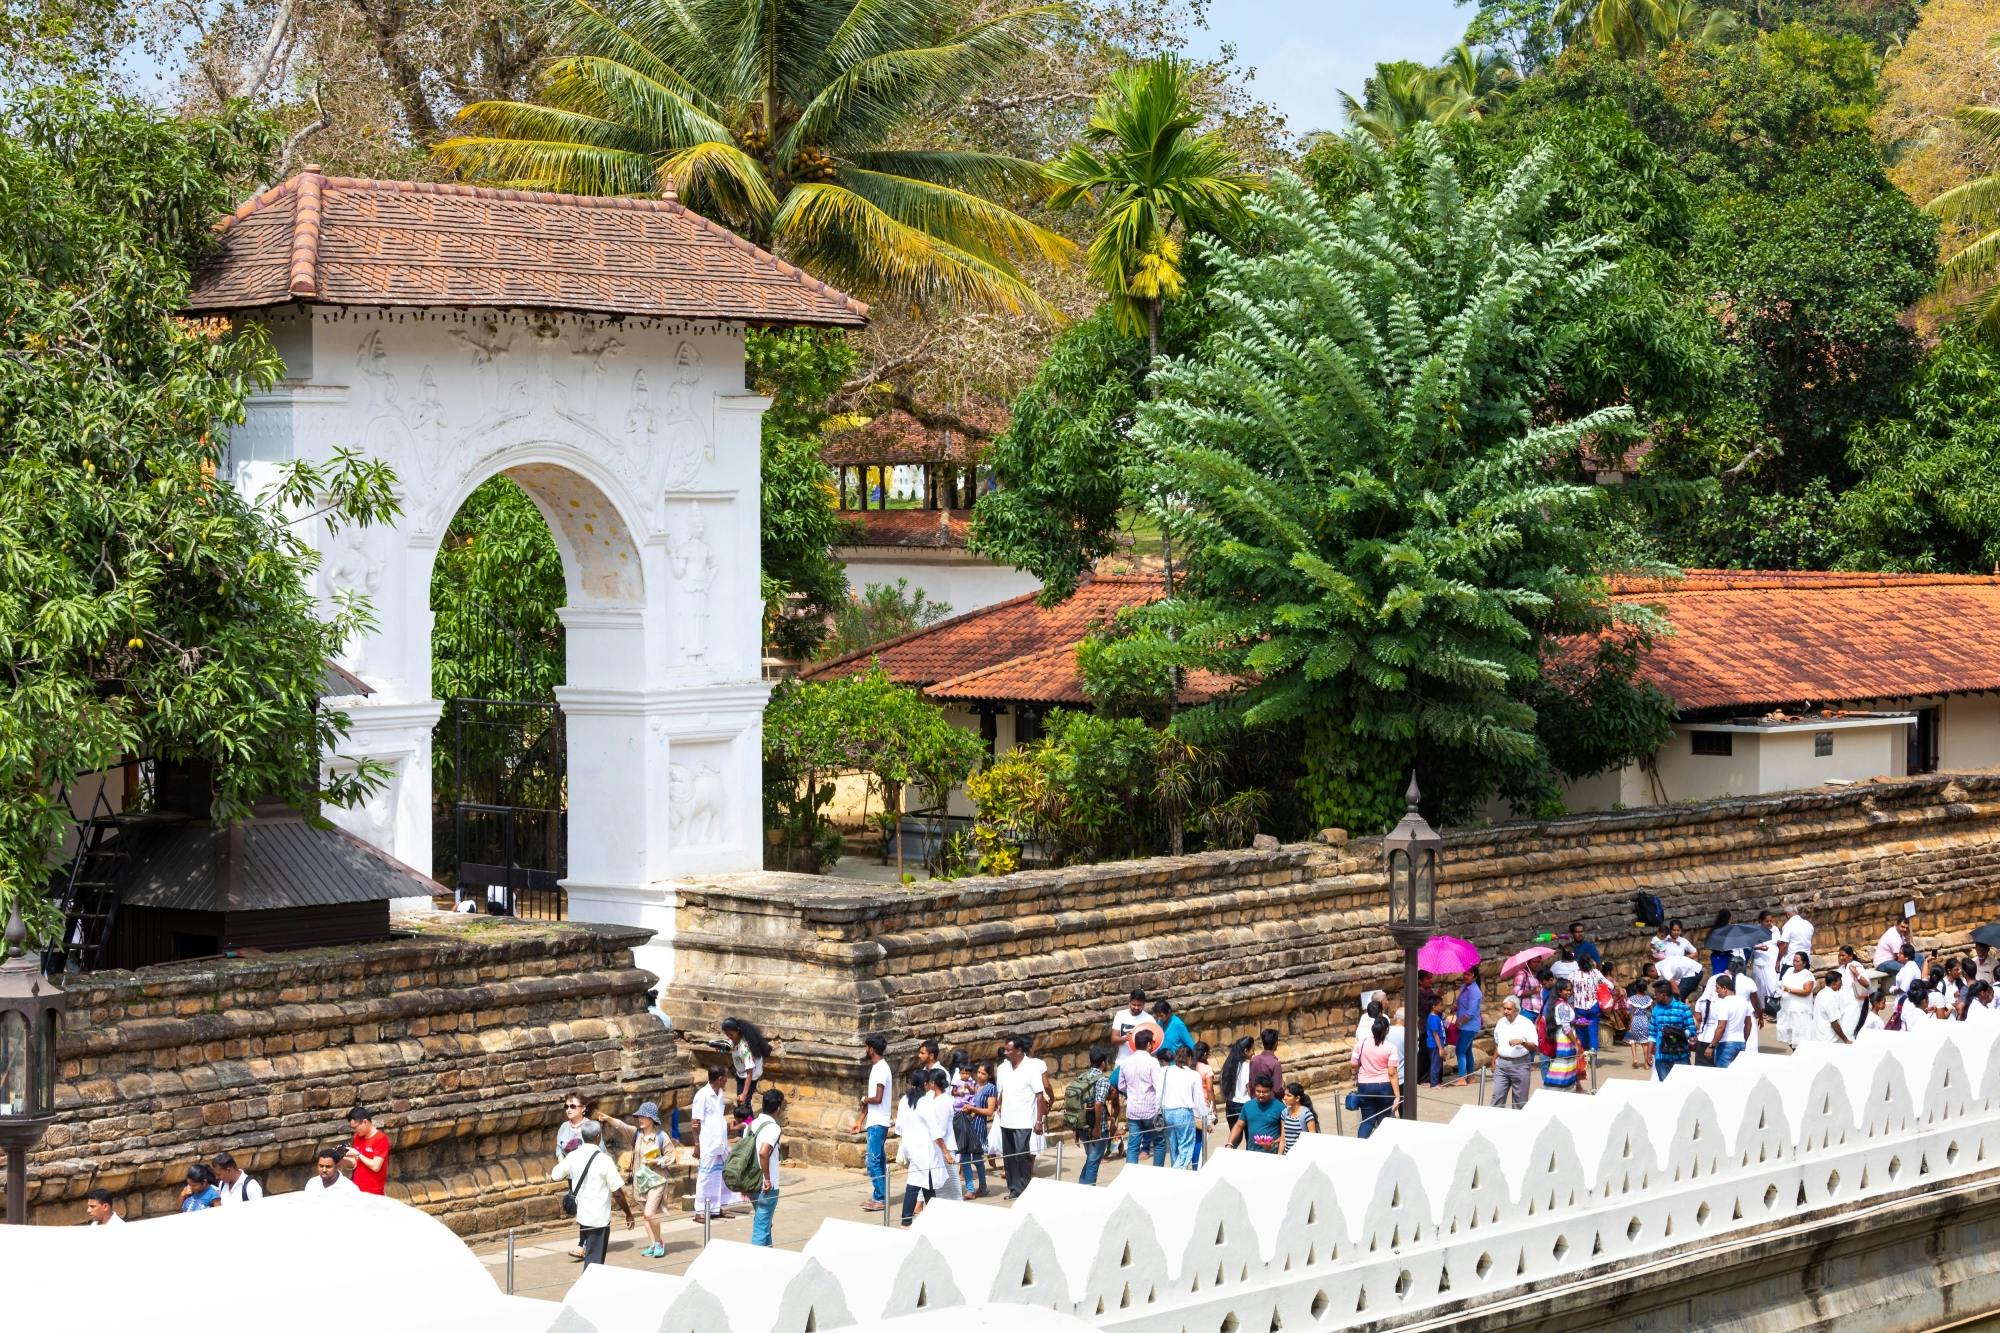 Kandy Day Tour with Temple of the Tooth Relic